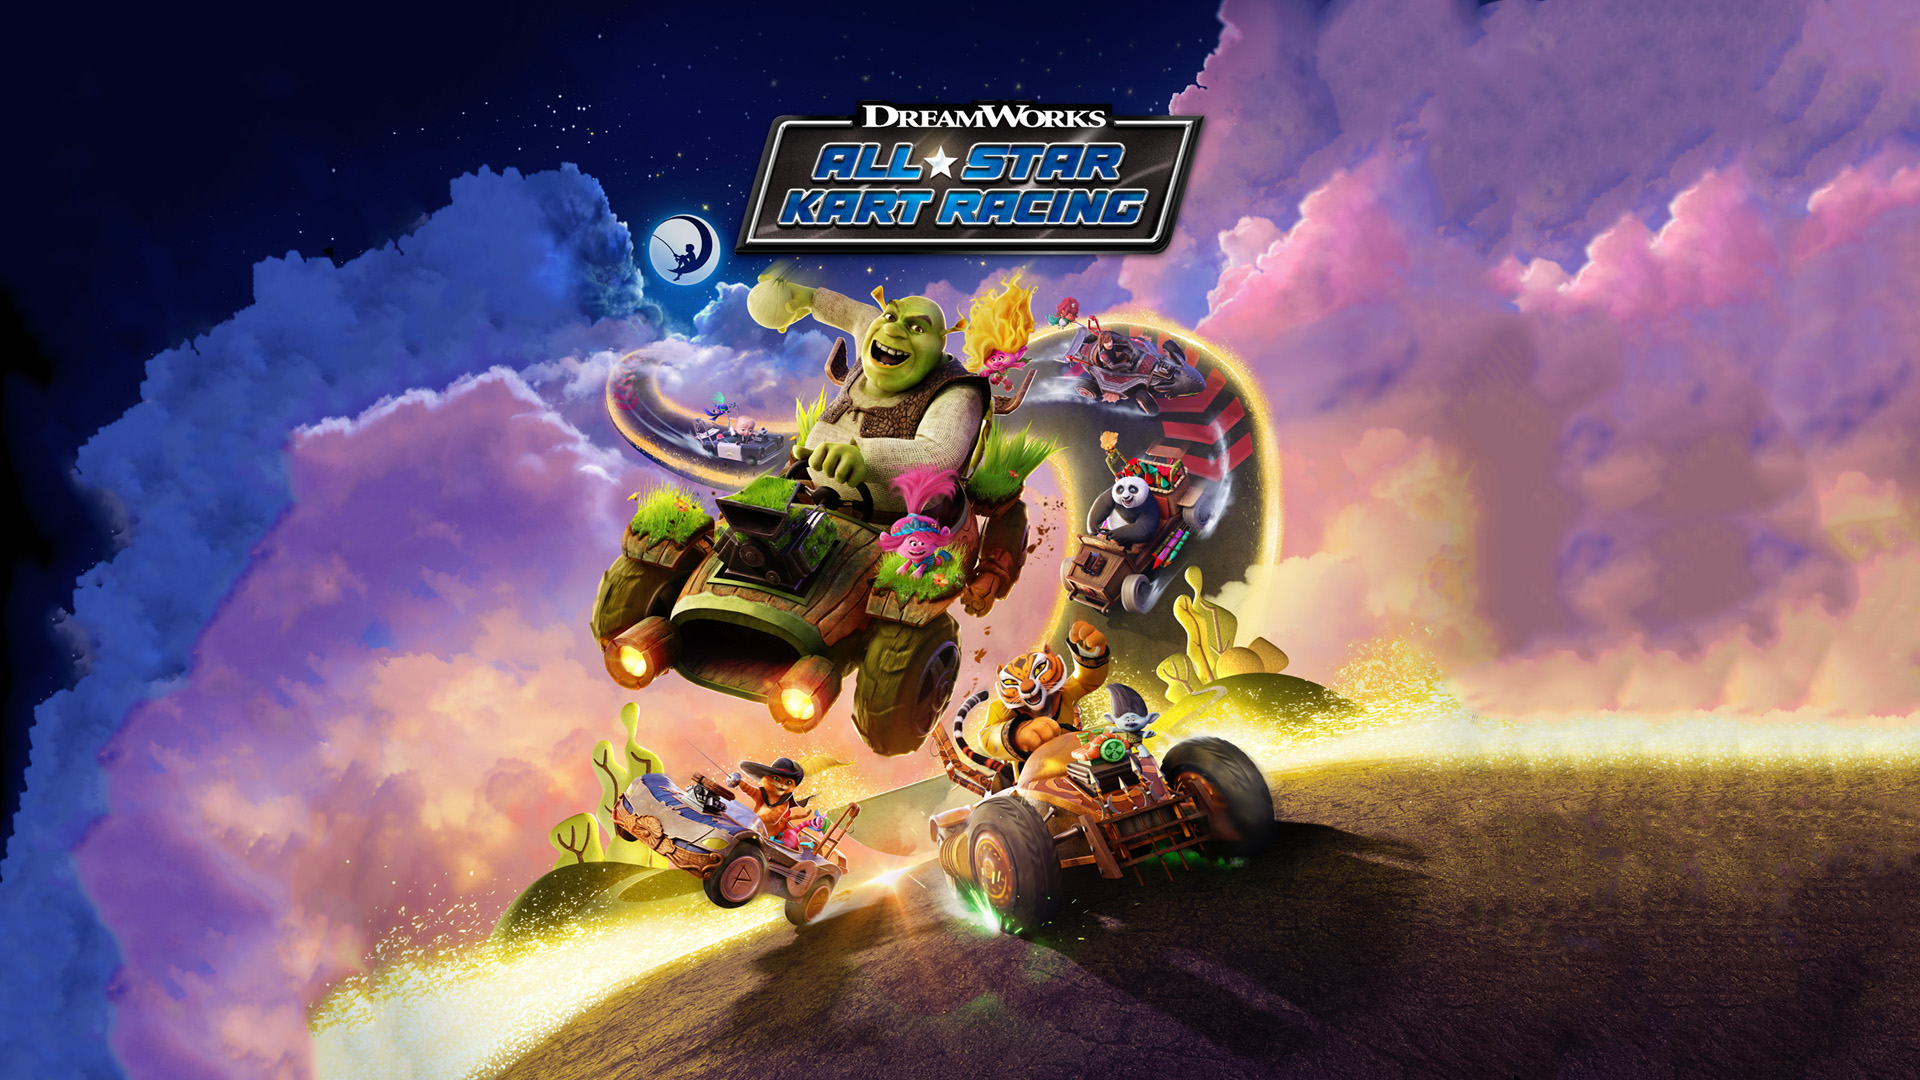 DreamWorks AllStar Kart Racing announced for PC and consoles Niche Gamer